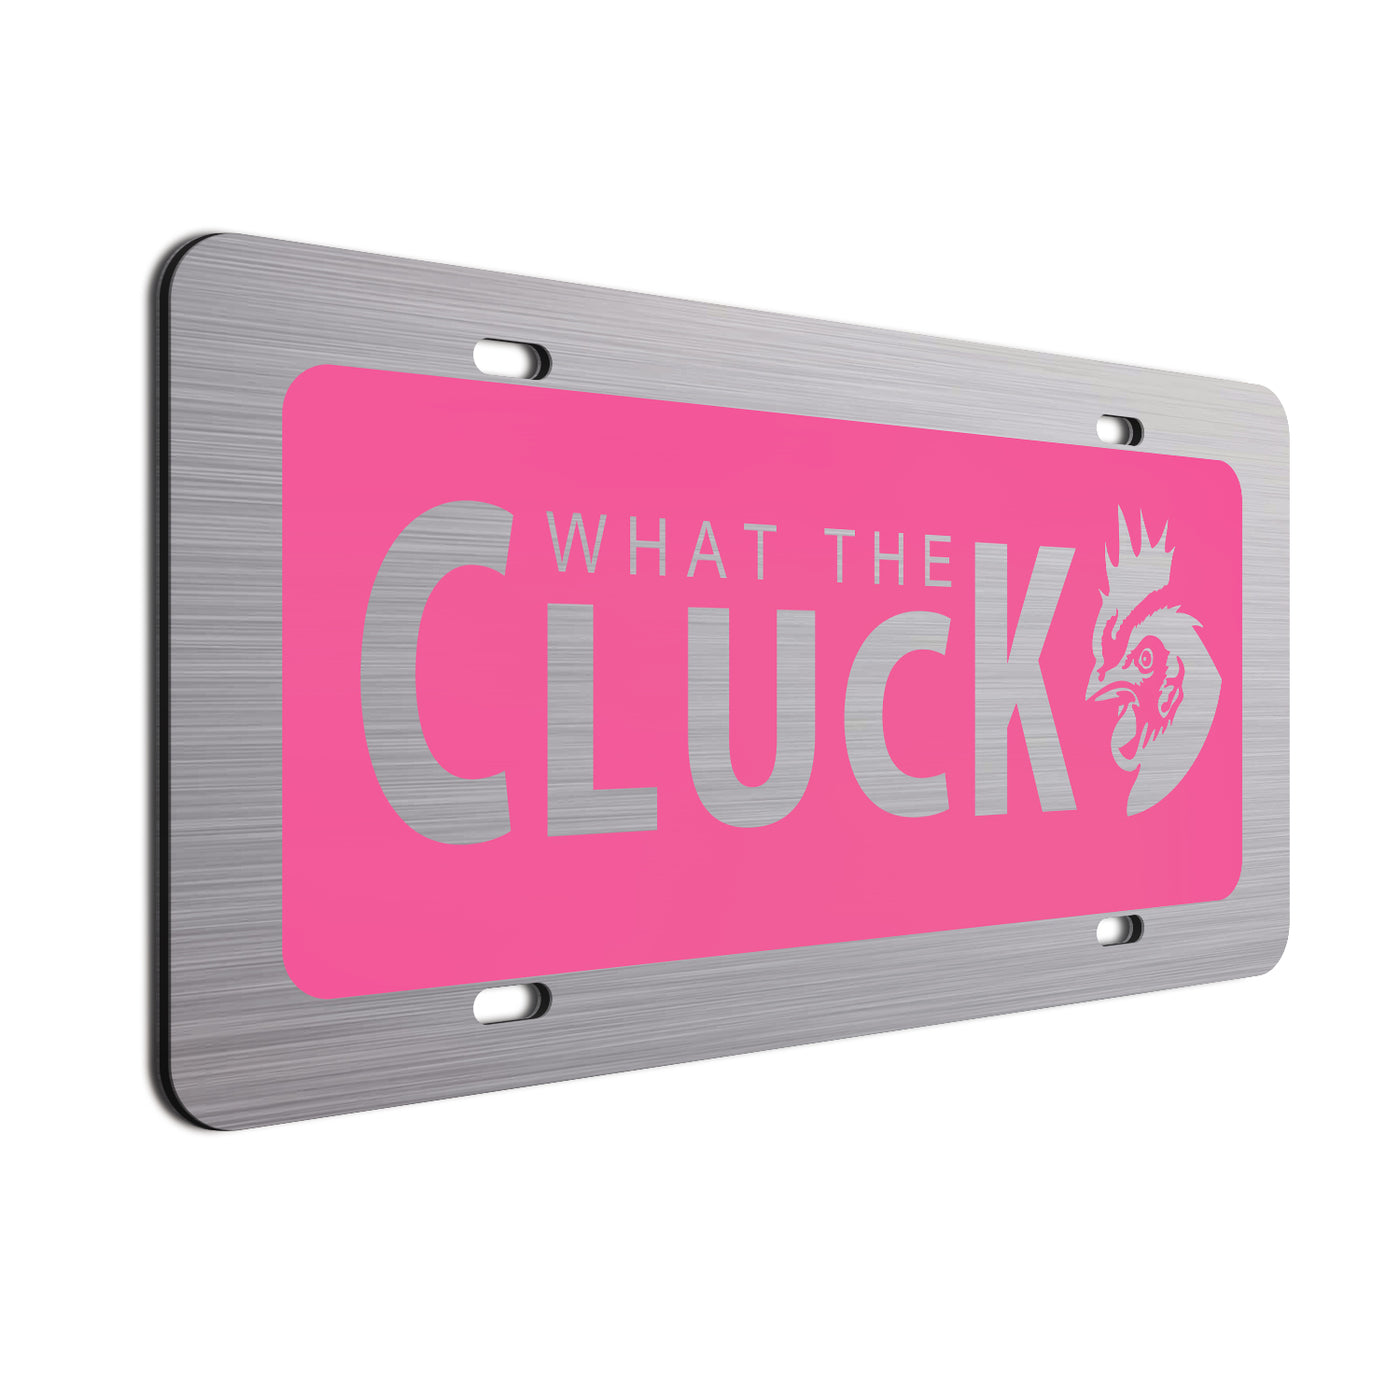 What The Cluck License Plate Pink